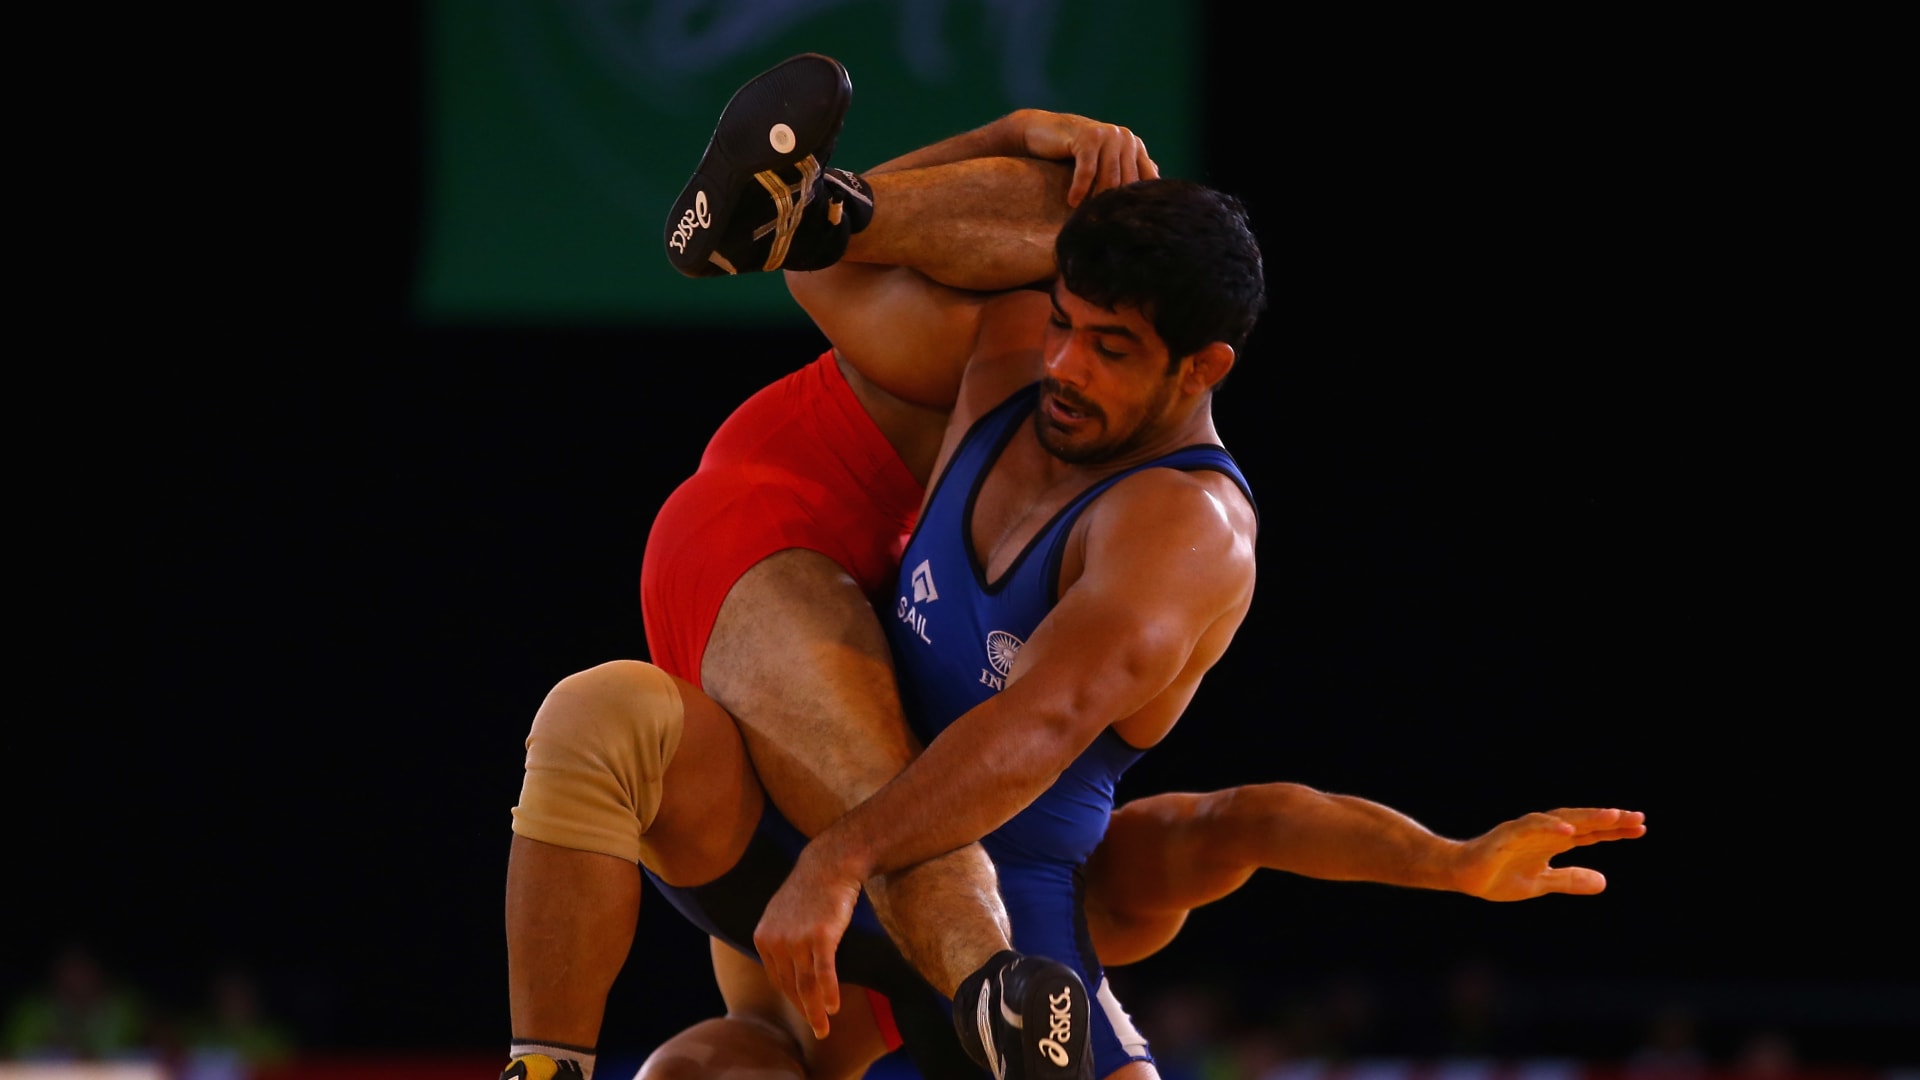 Indian wrestler Sushil Kumar almost out of the race for 2020 Olympics